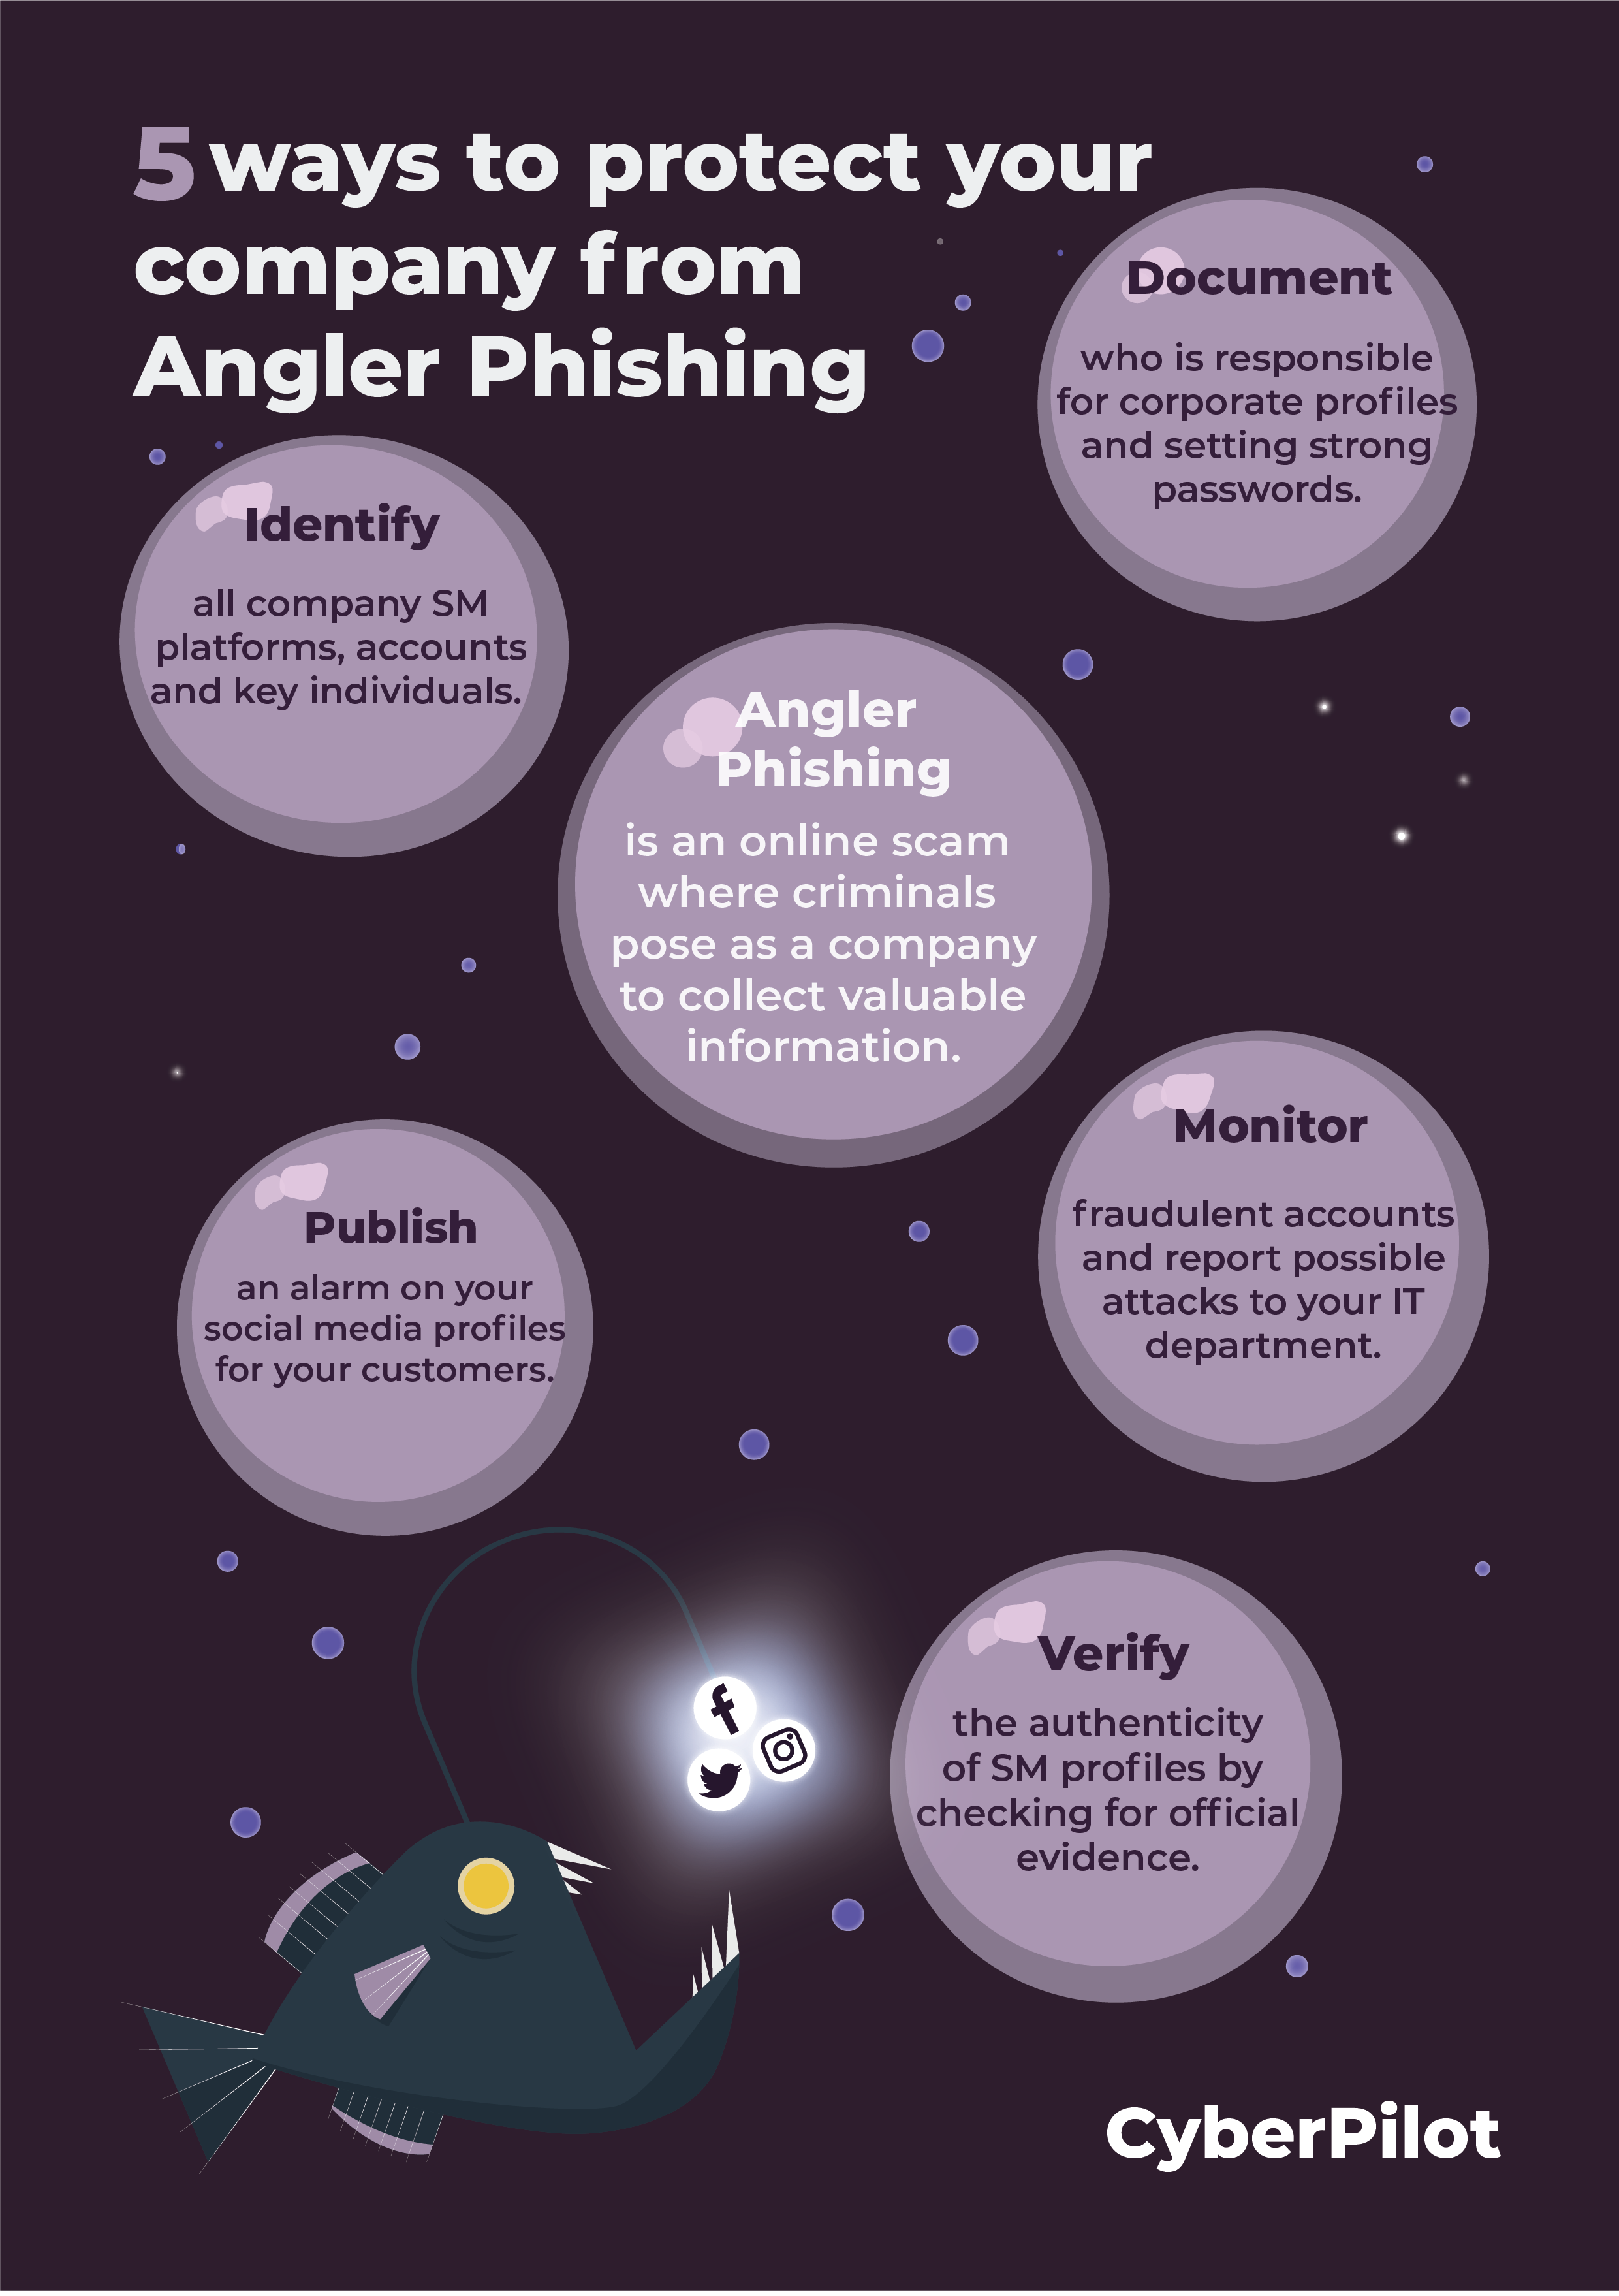 An infographic showing 5 ways to protect your company against Angler phishing